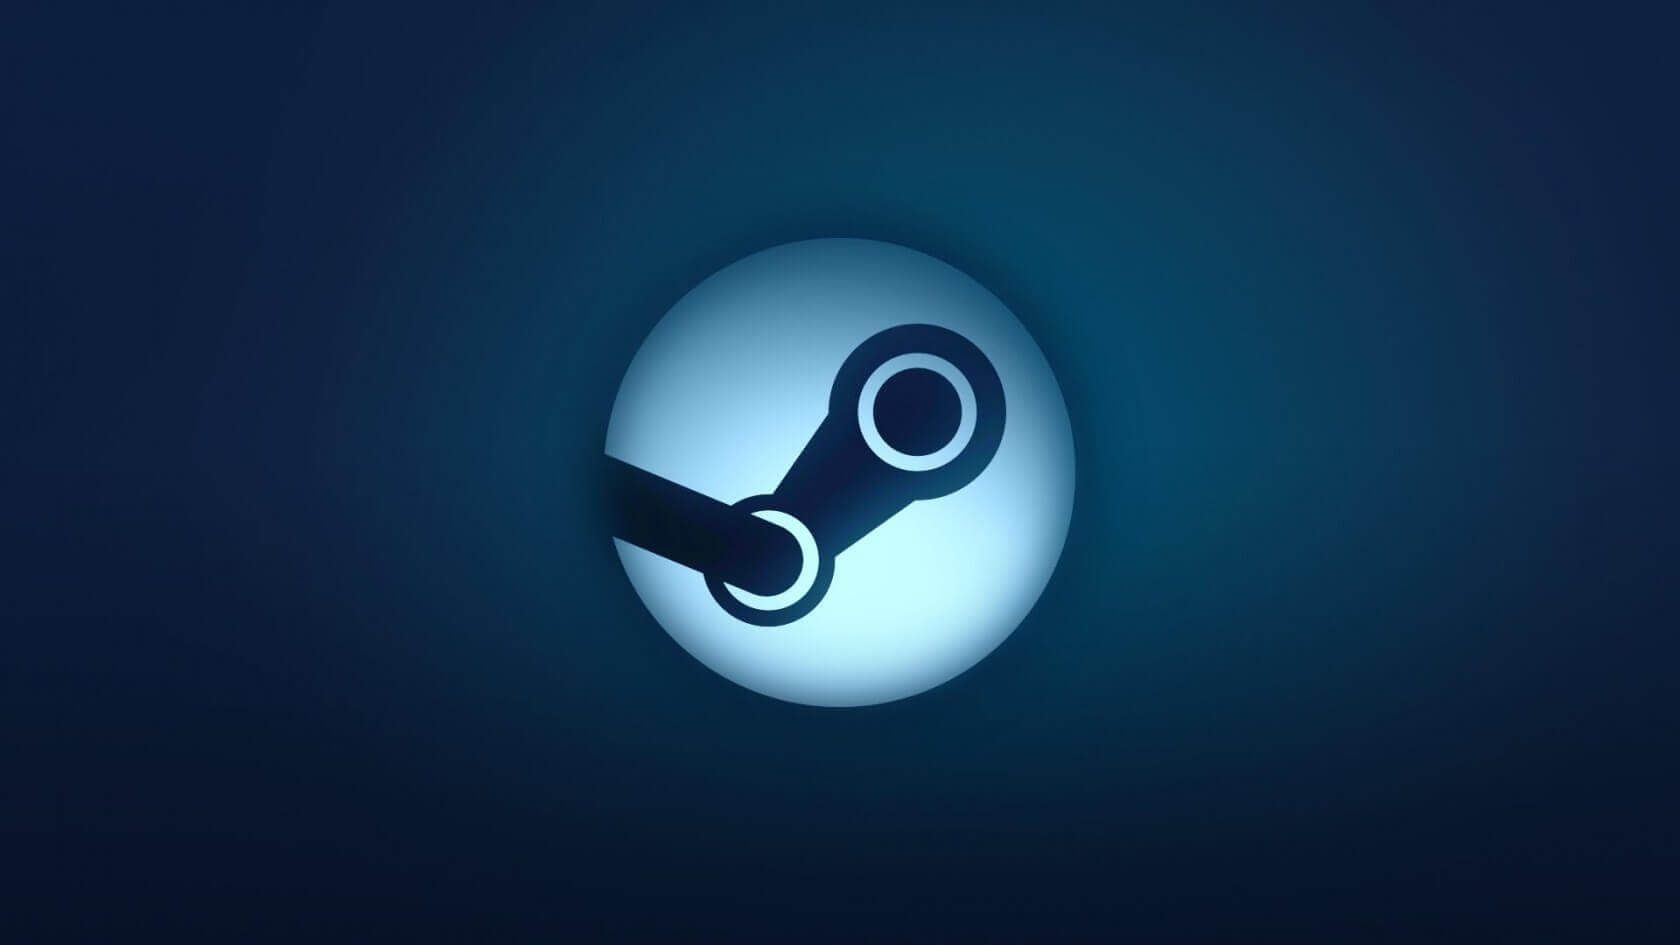 Steam's latest experimental feature helps you choose what game to play next